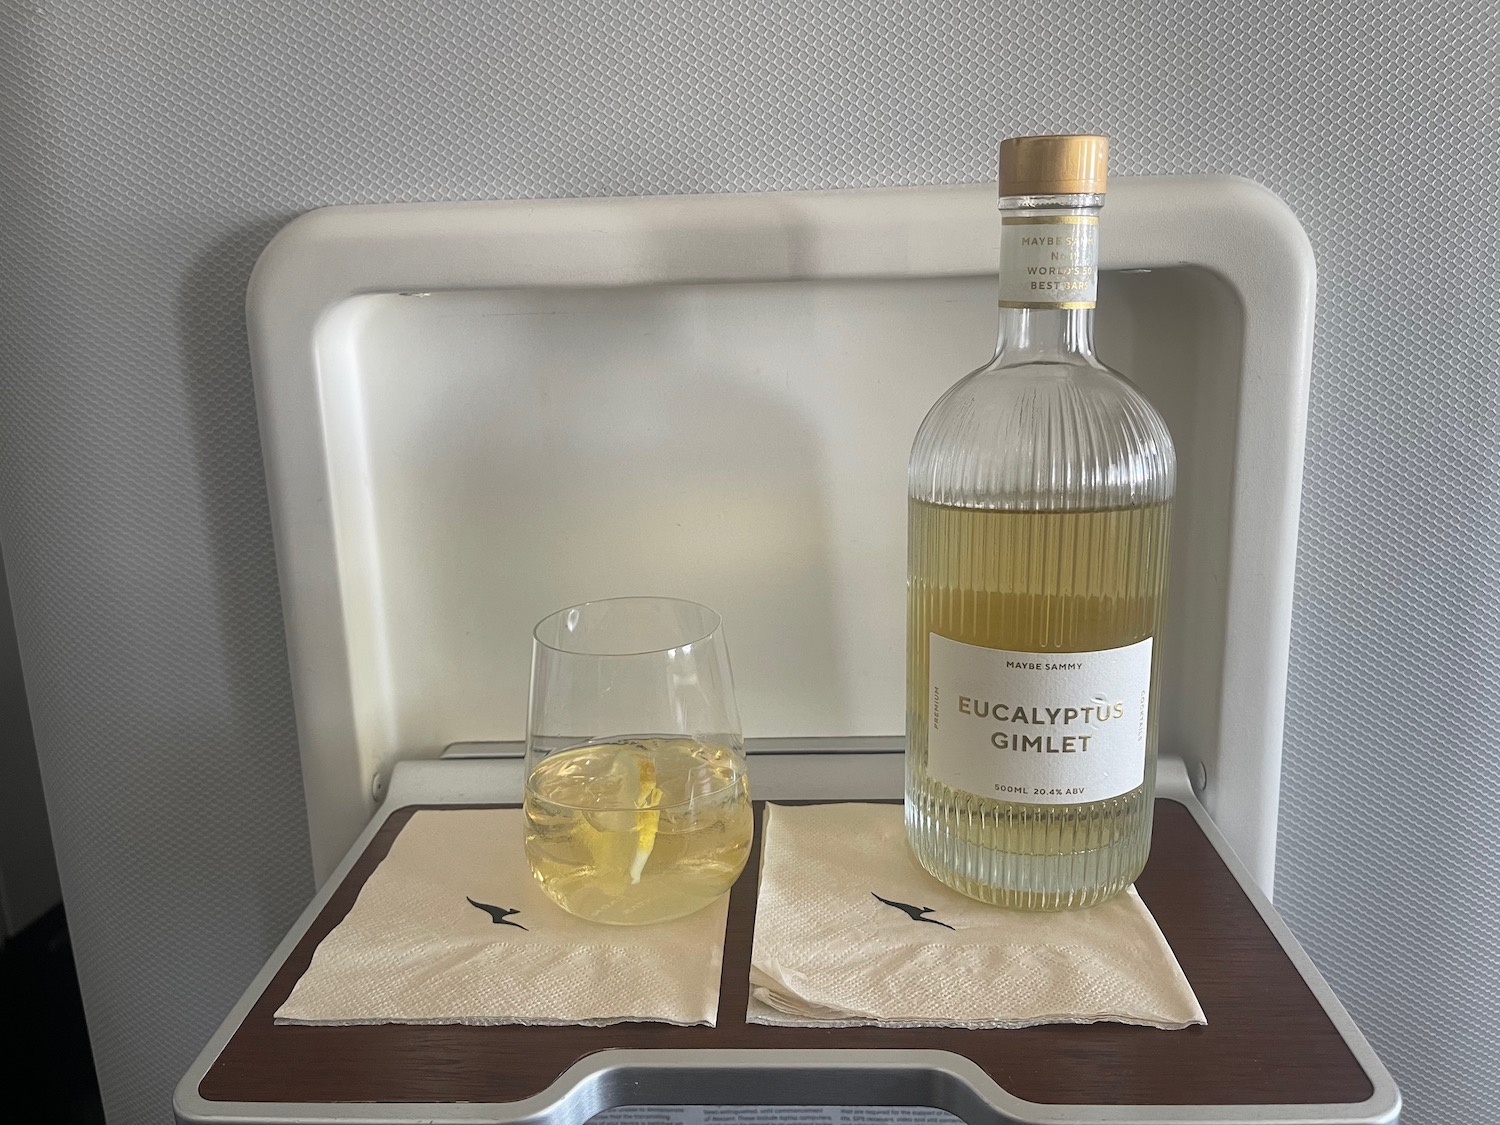 a bottle and glass of liquid on a tray